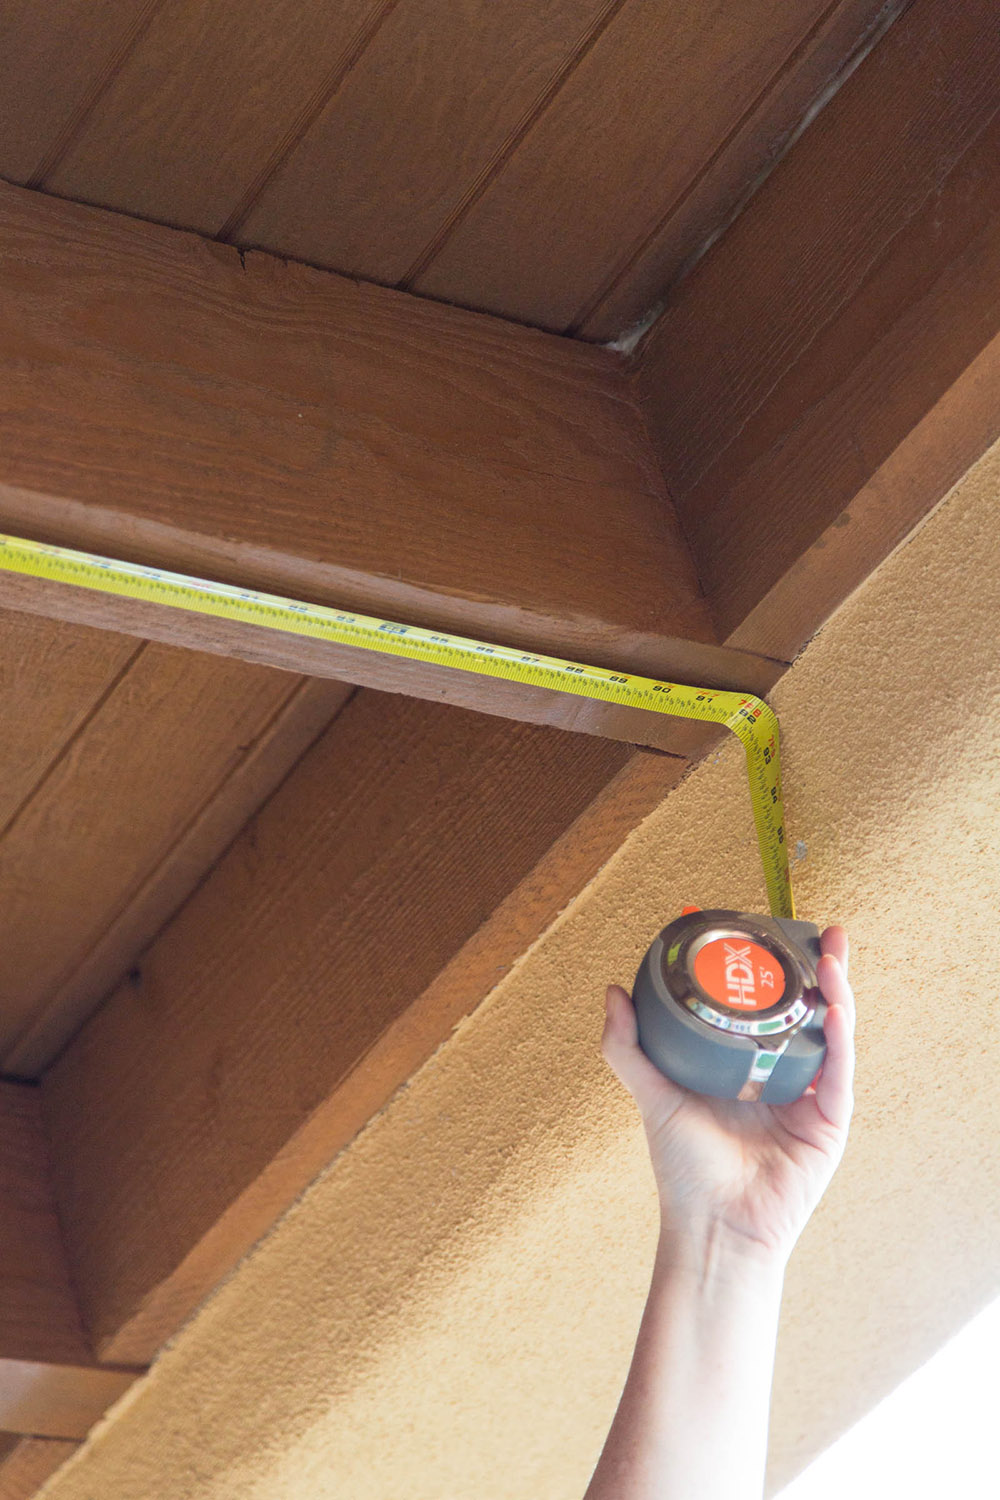 A tape measure is held up against a wooden ceiling beam and tan wall.